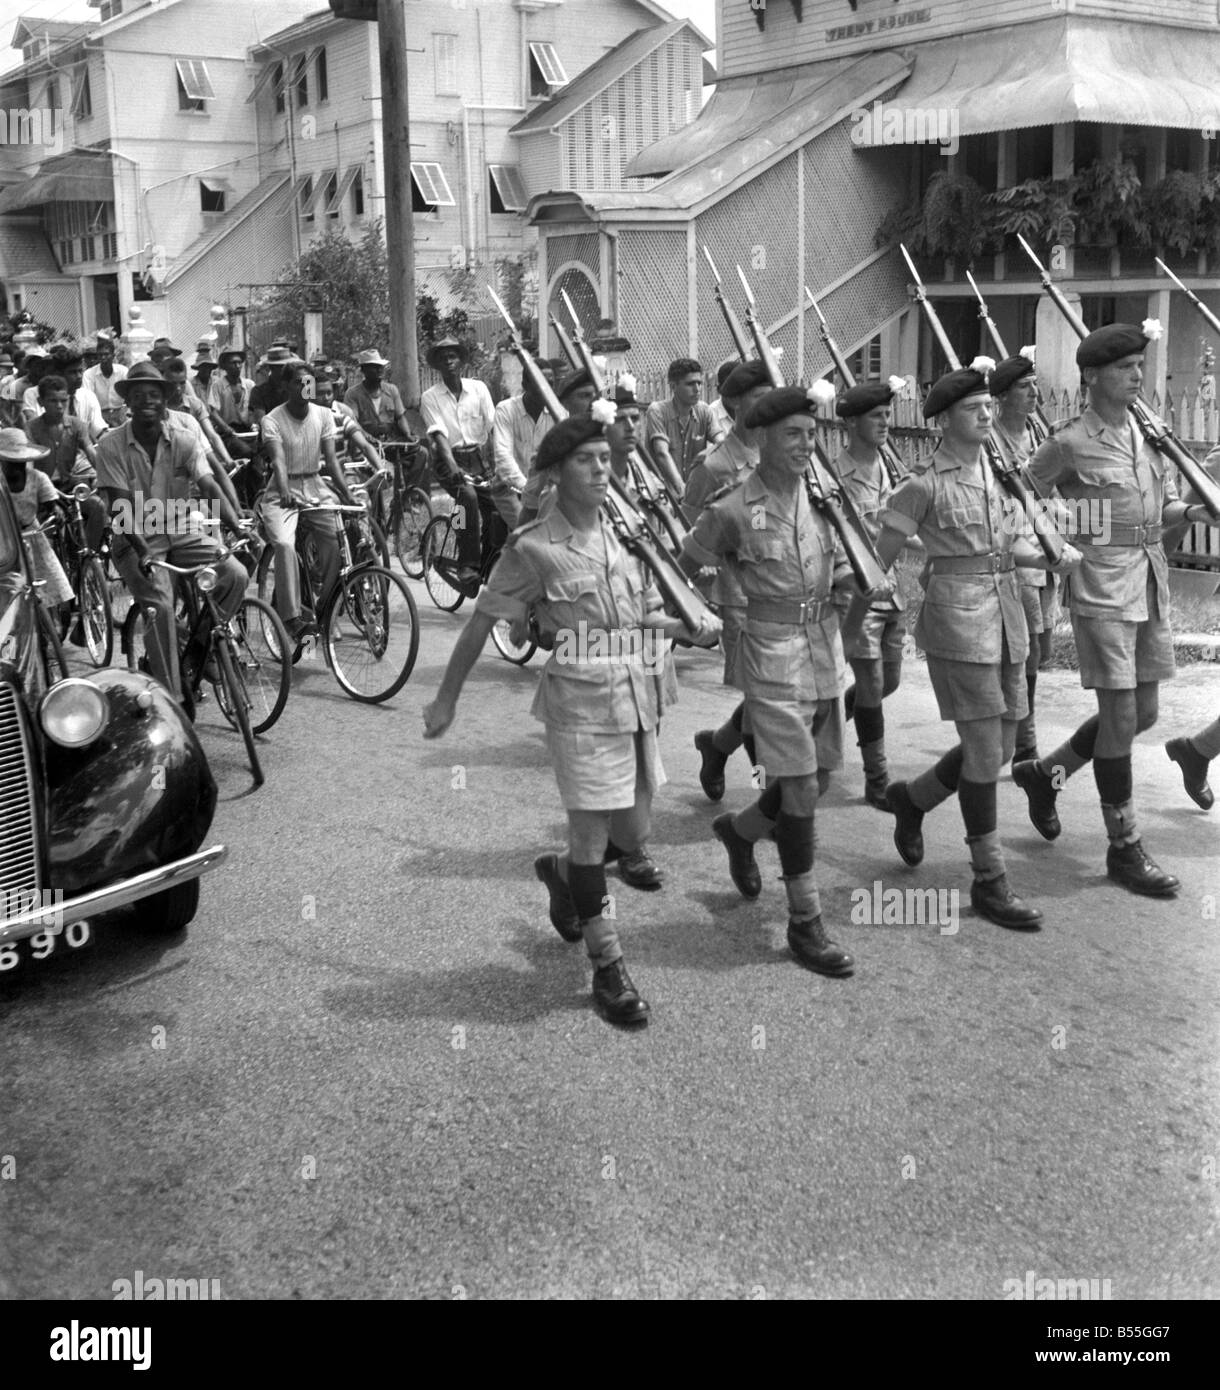 British soldiers marching in Georgetown, British Guiana watched by local citizens. The troops were sent to calm a serious constitutional crisis whaich arose following the election earlier in the year. ;October 1953 ;D6229-005 Stock Photo